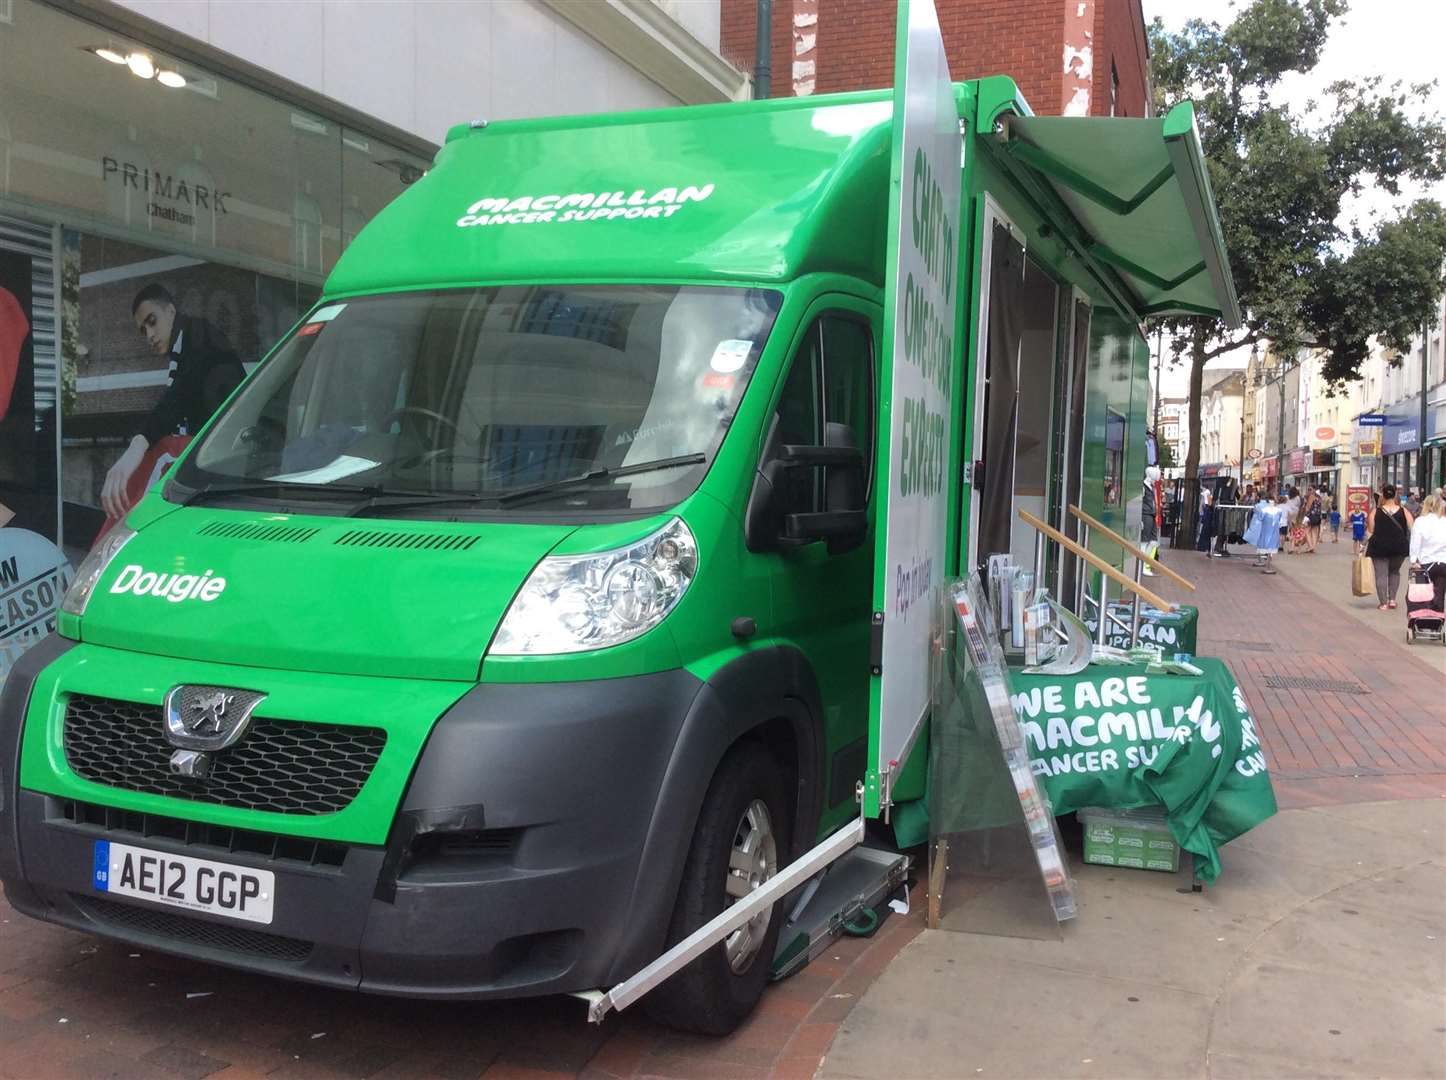 Macmillan's mobile bus Dougie rolls into Kent with free information and support (4299863)